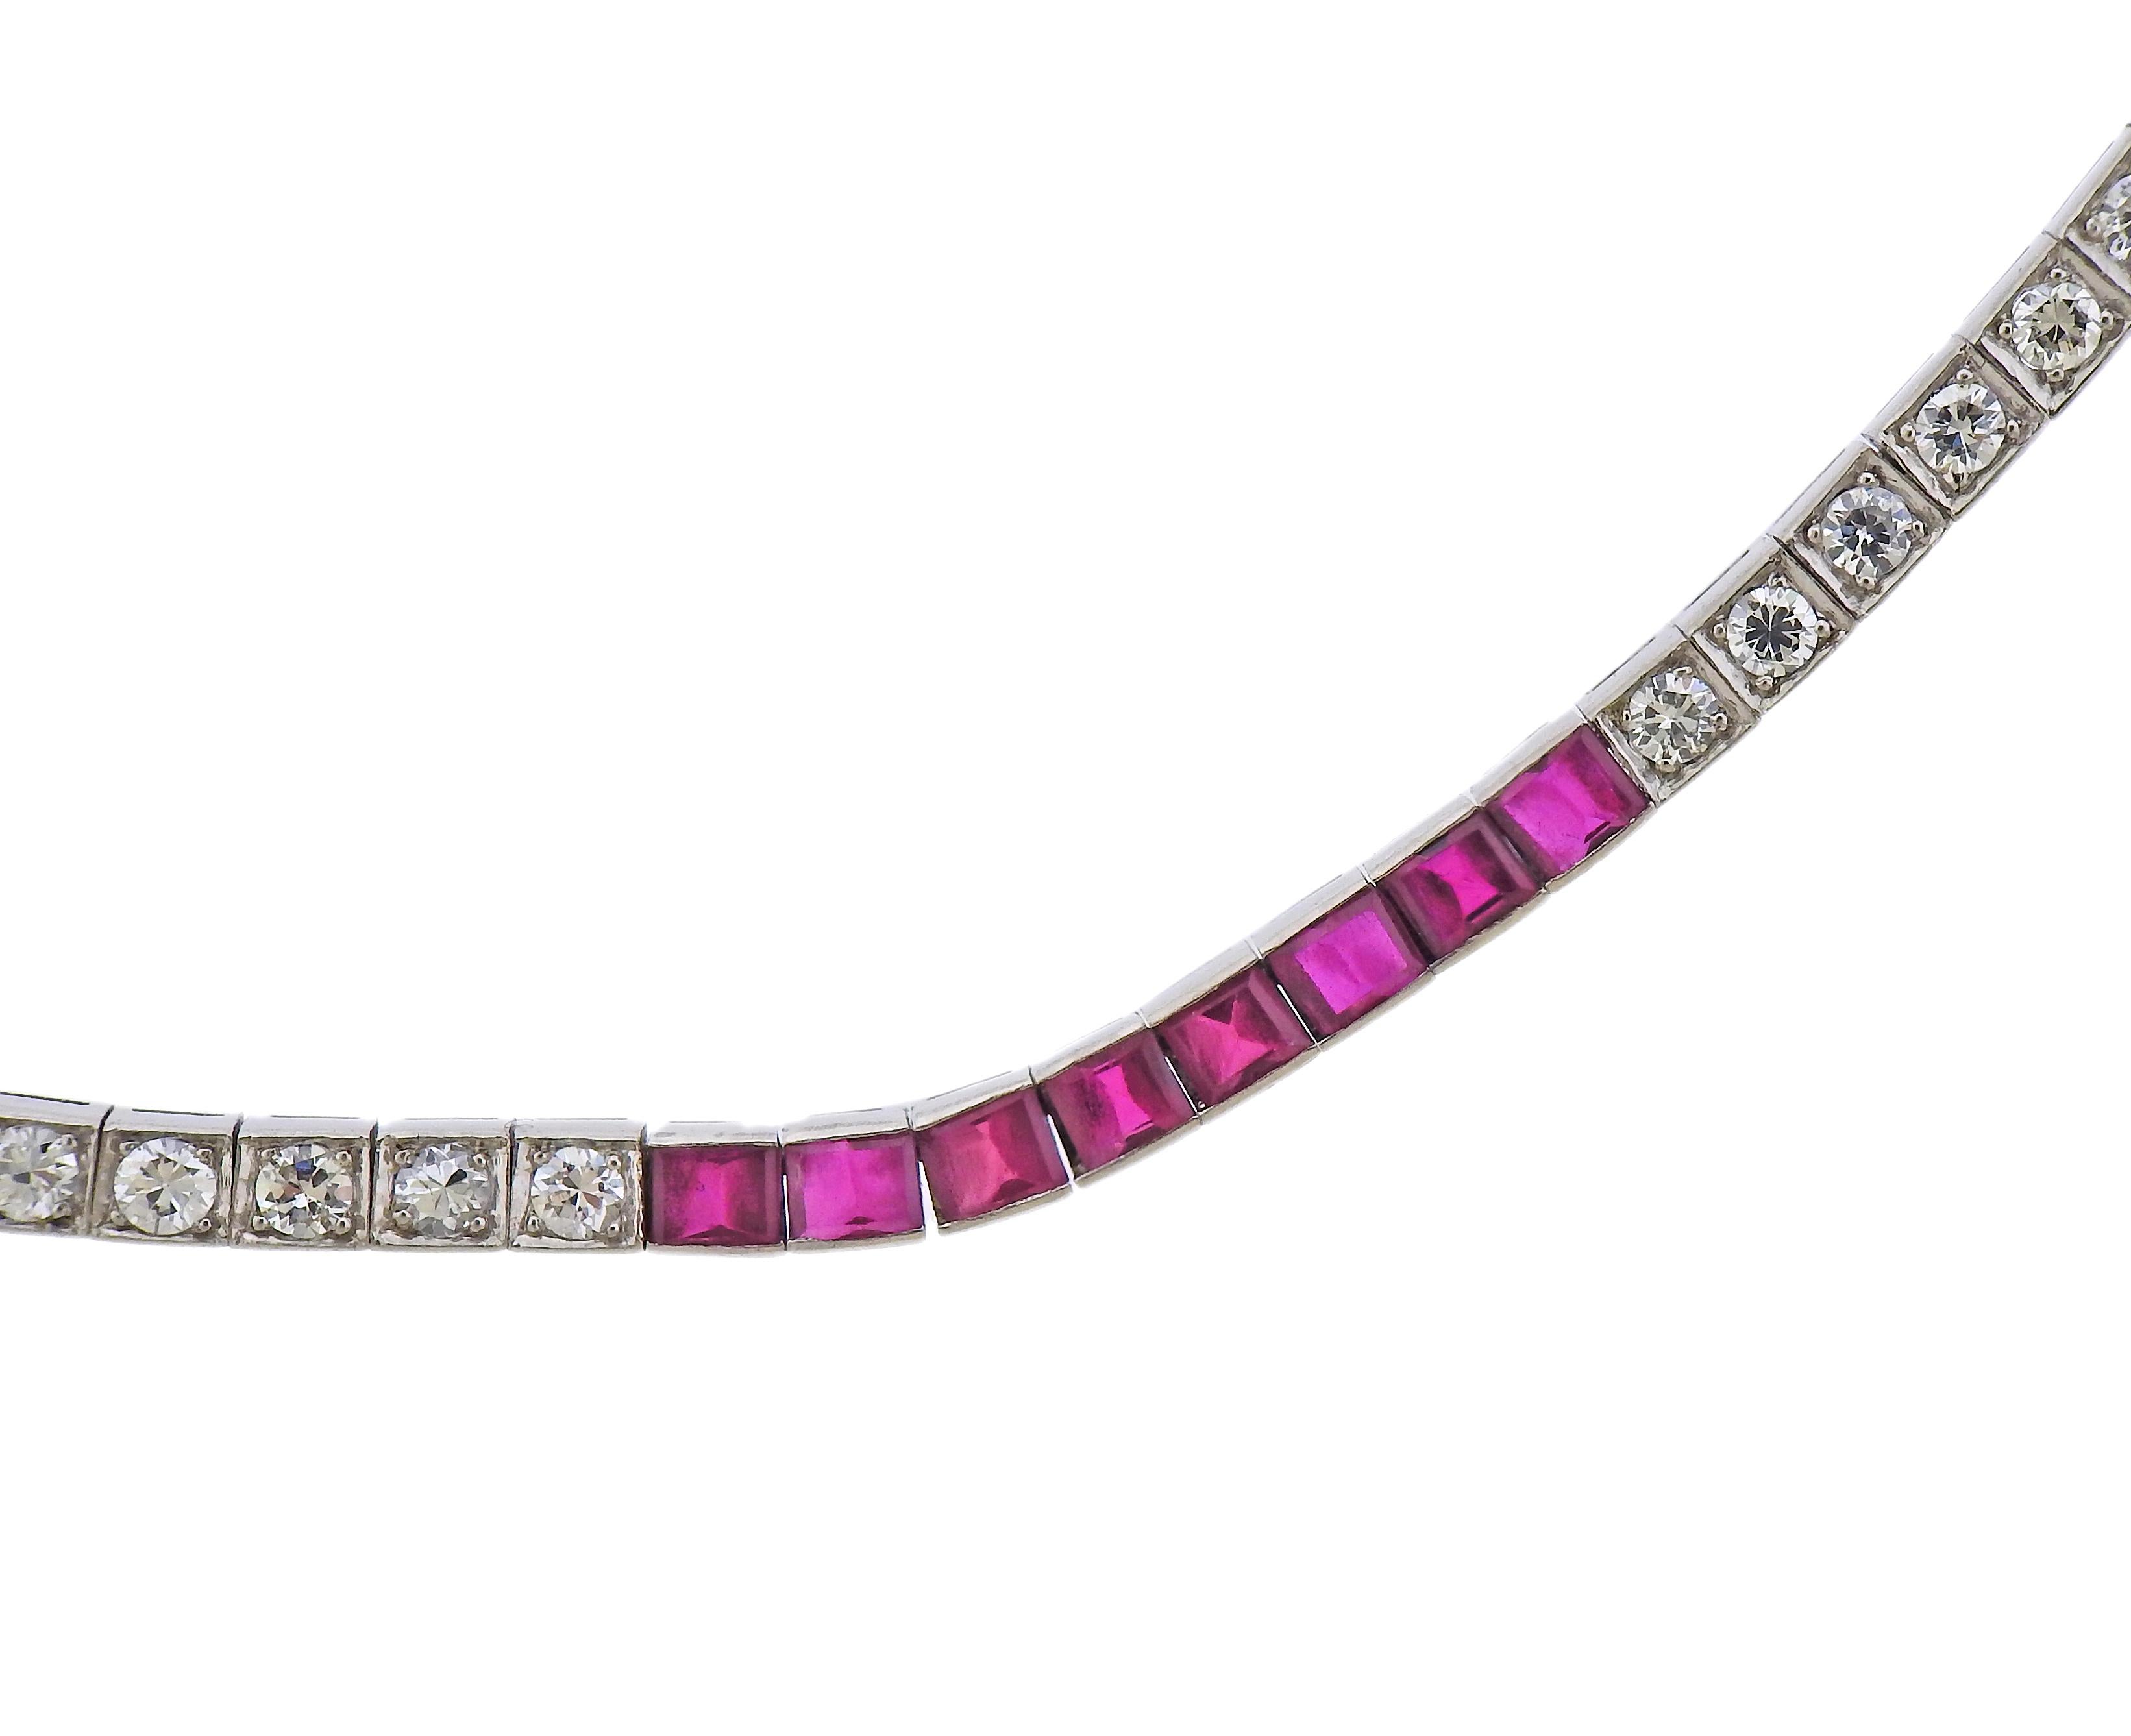 Platinum necklace with rubies and approx. 1.60ctw in diamonds. Necklace is 16.25